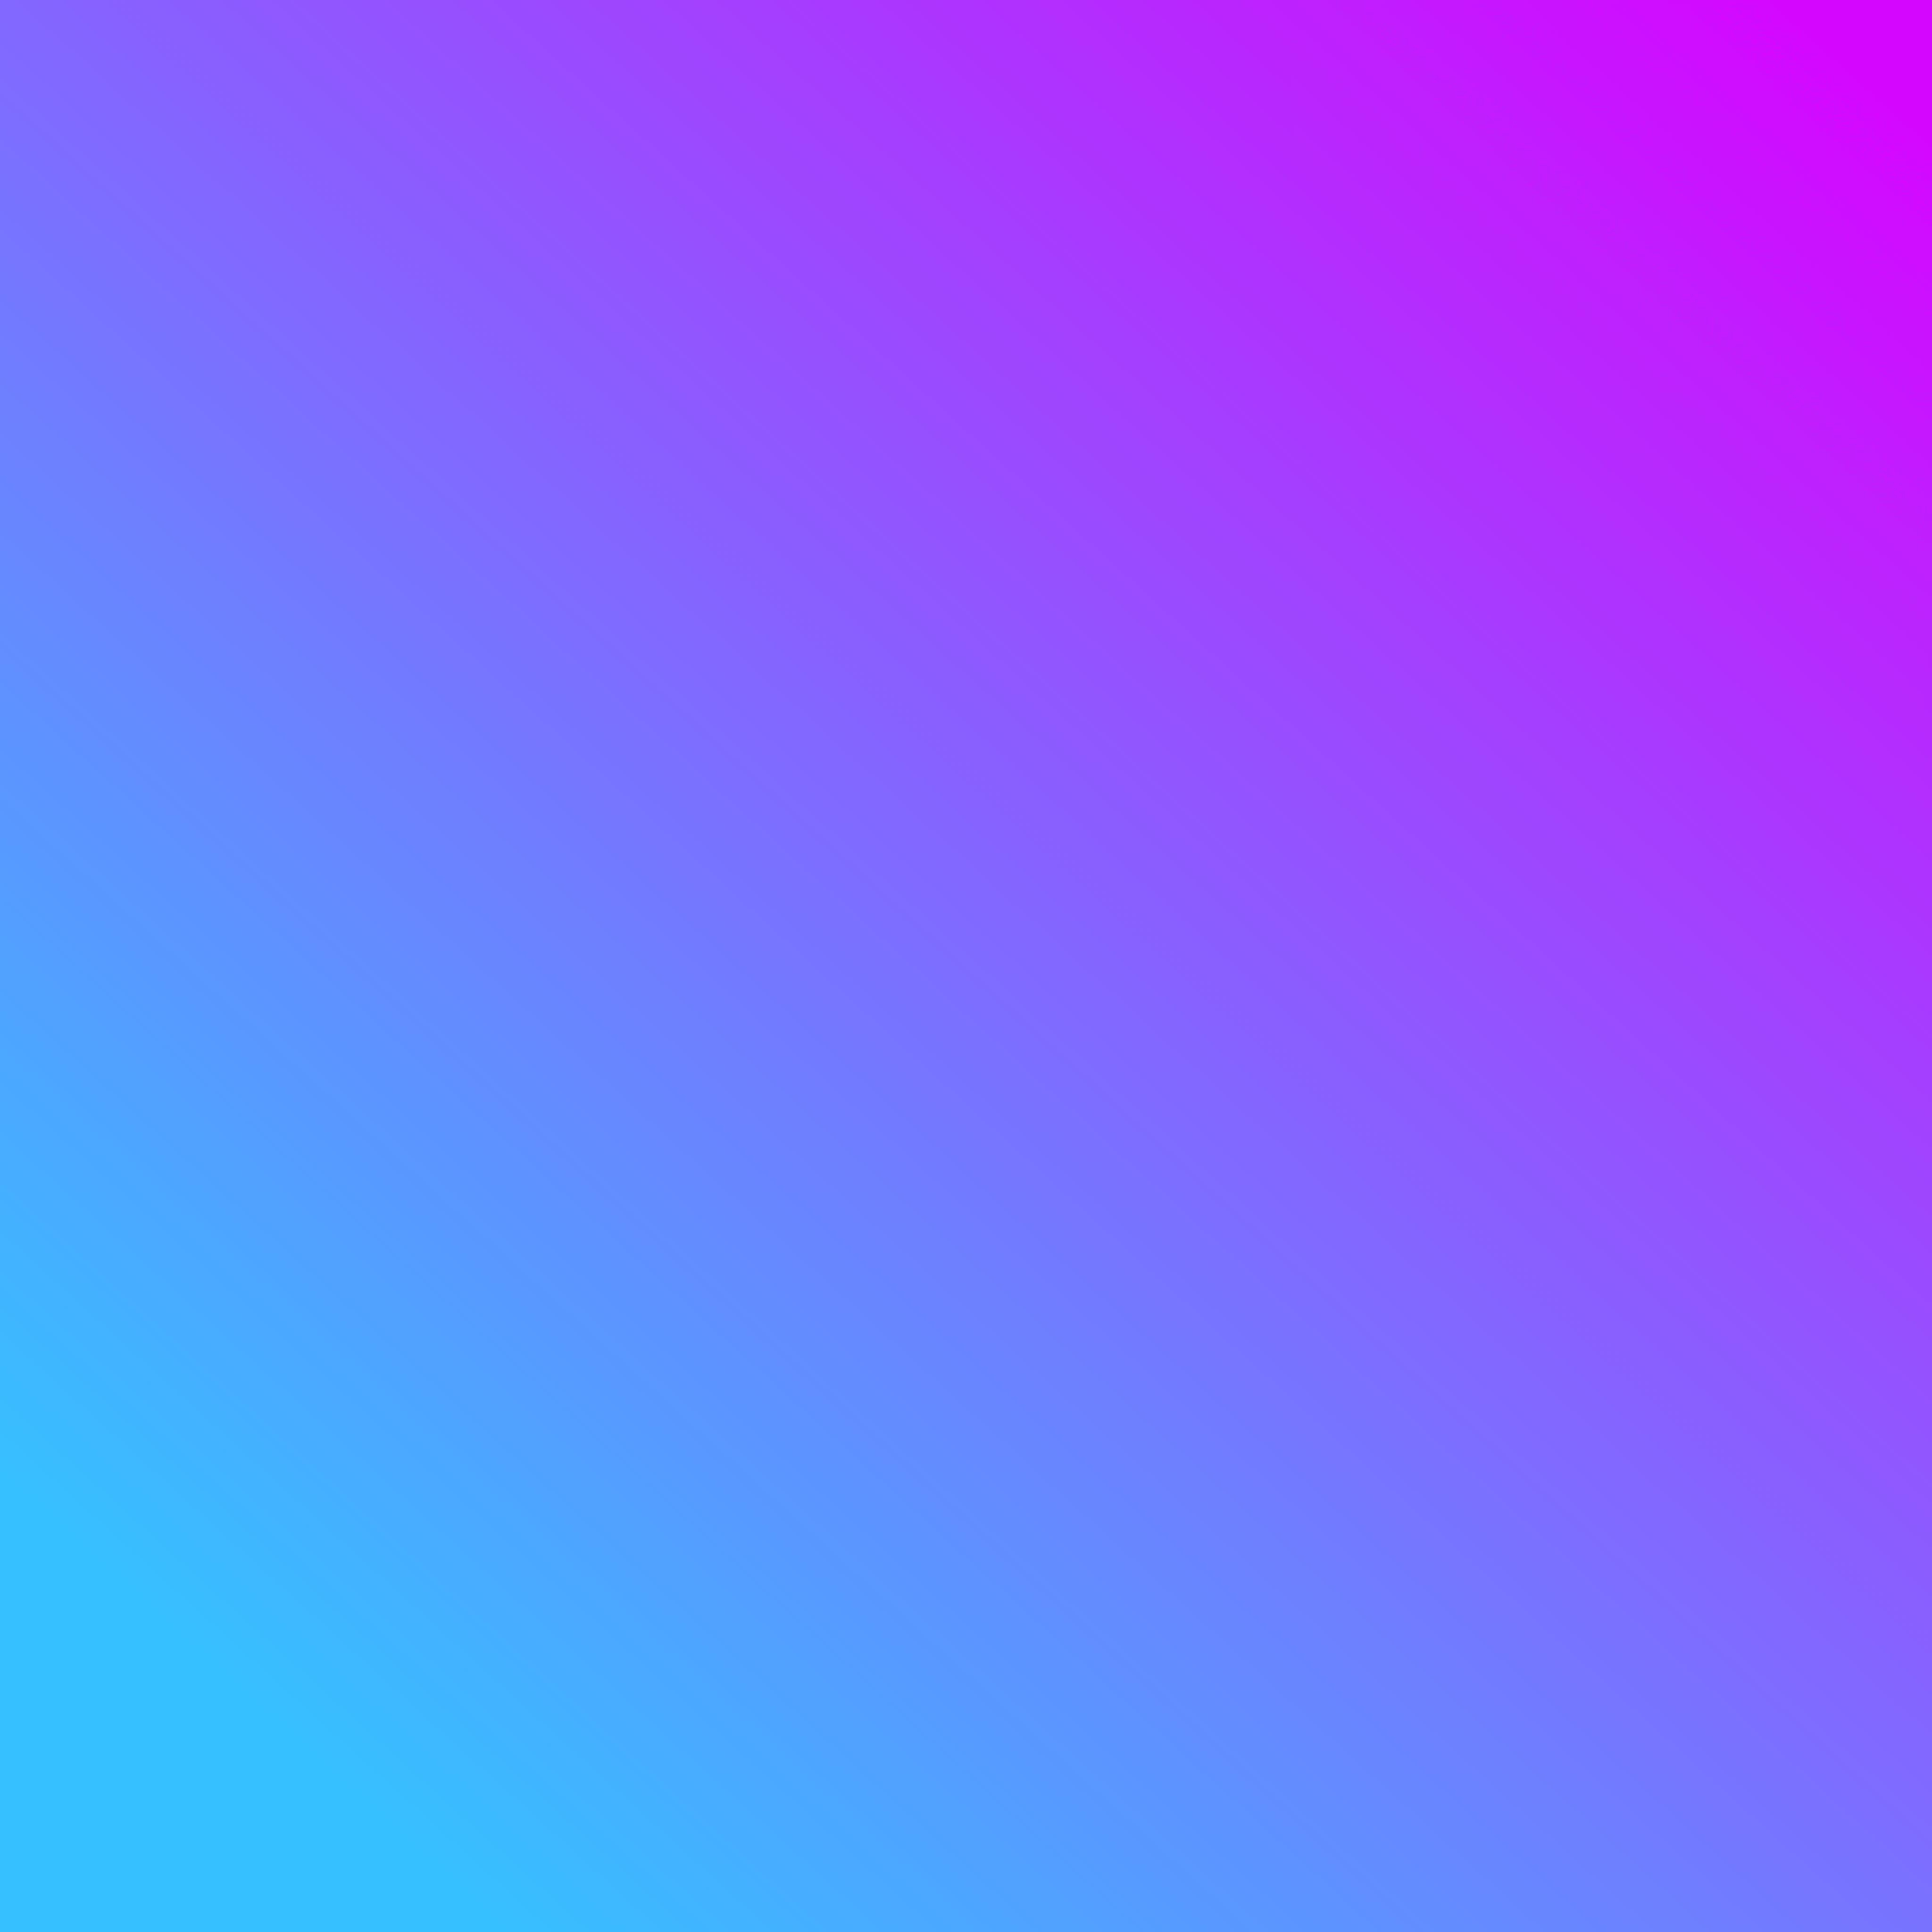 4096x4096 Today at Apple at Home Gradient Wallpaper